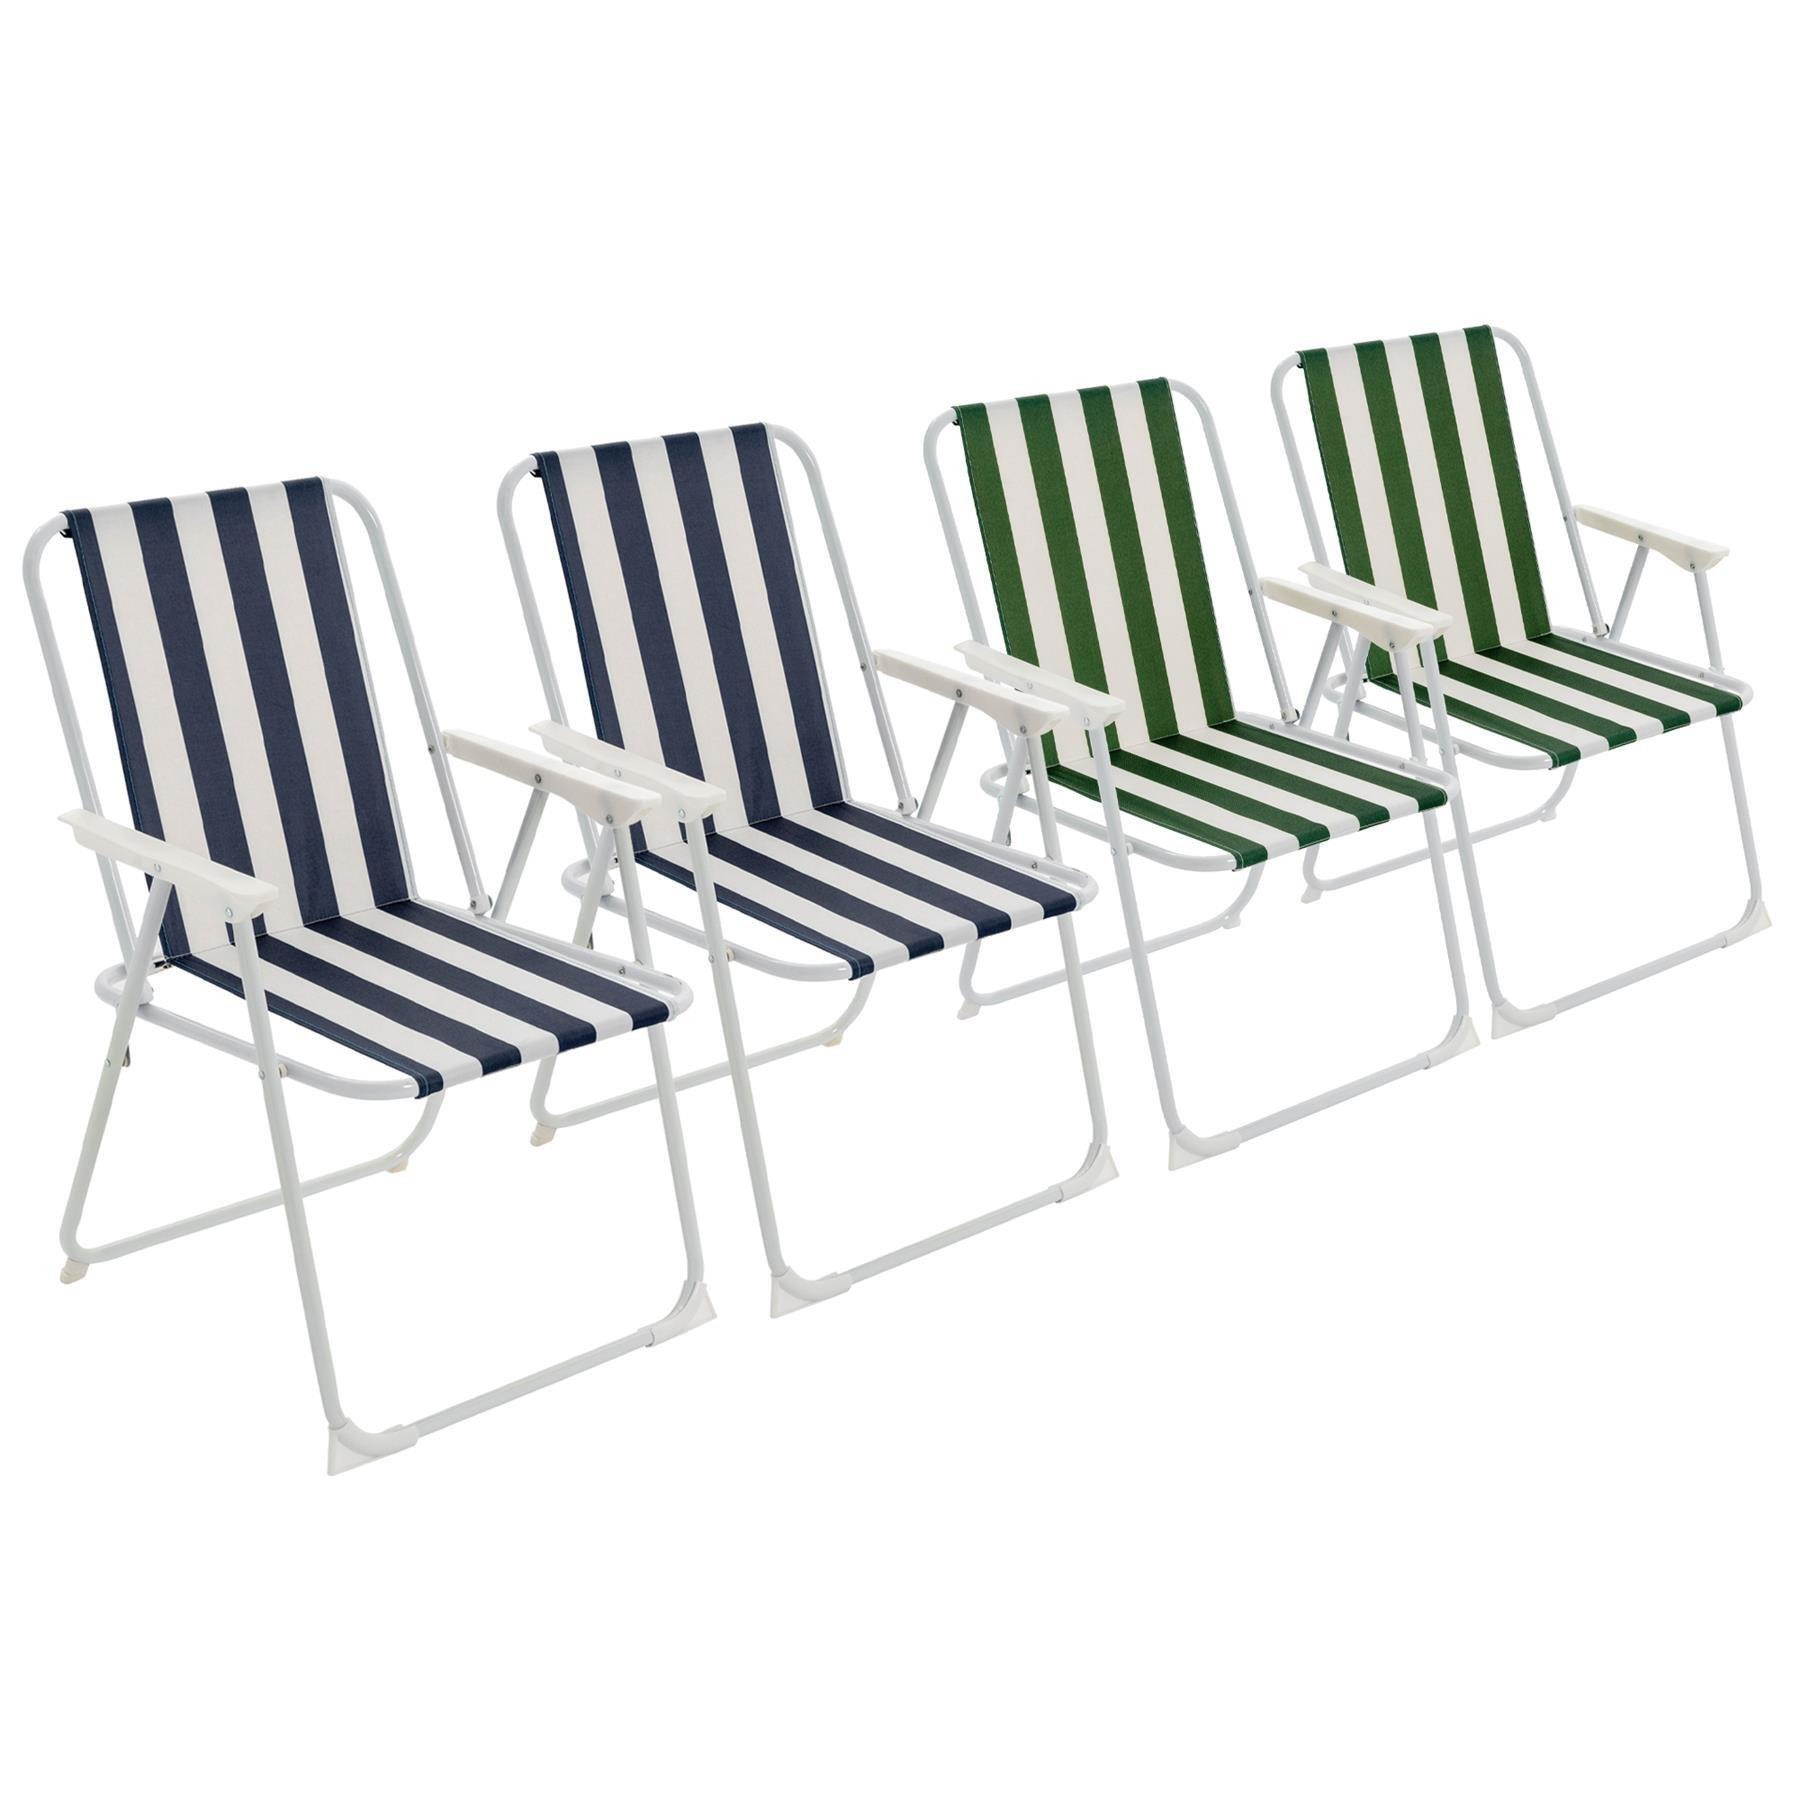 Folding Metal Beach Chairs Blue/Green Stripe Pack of 4 - image 1